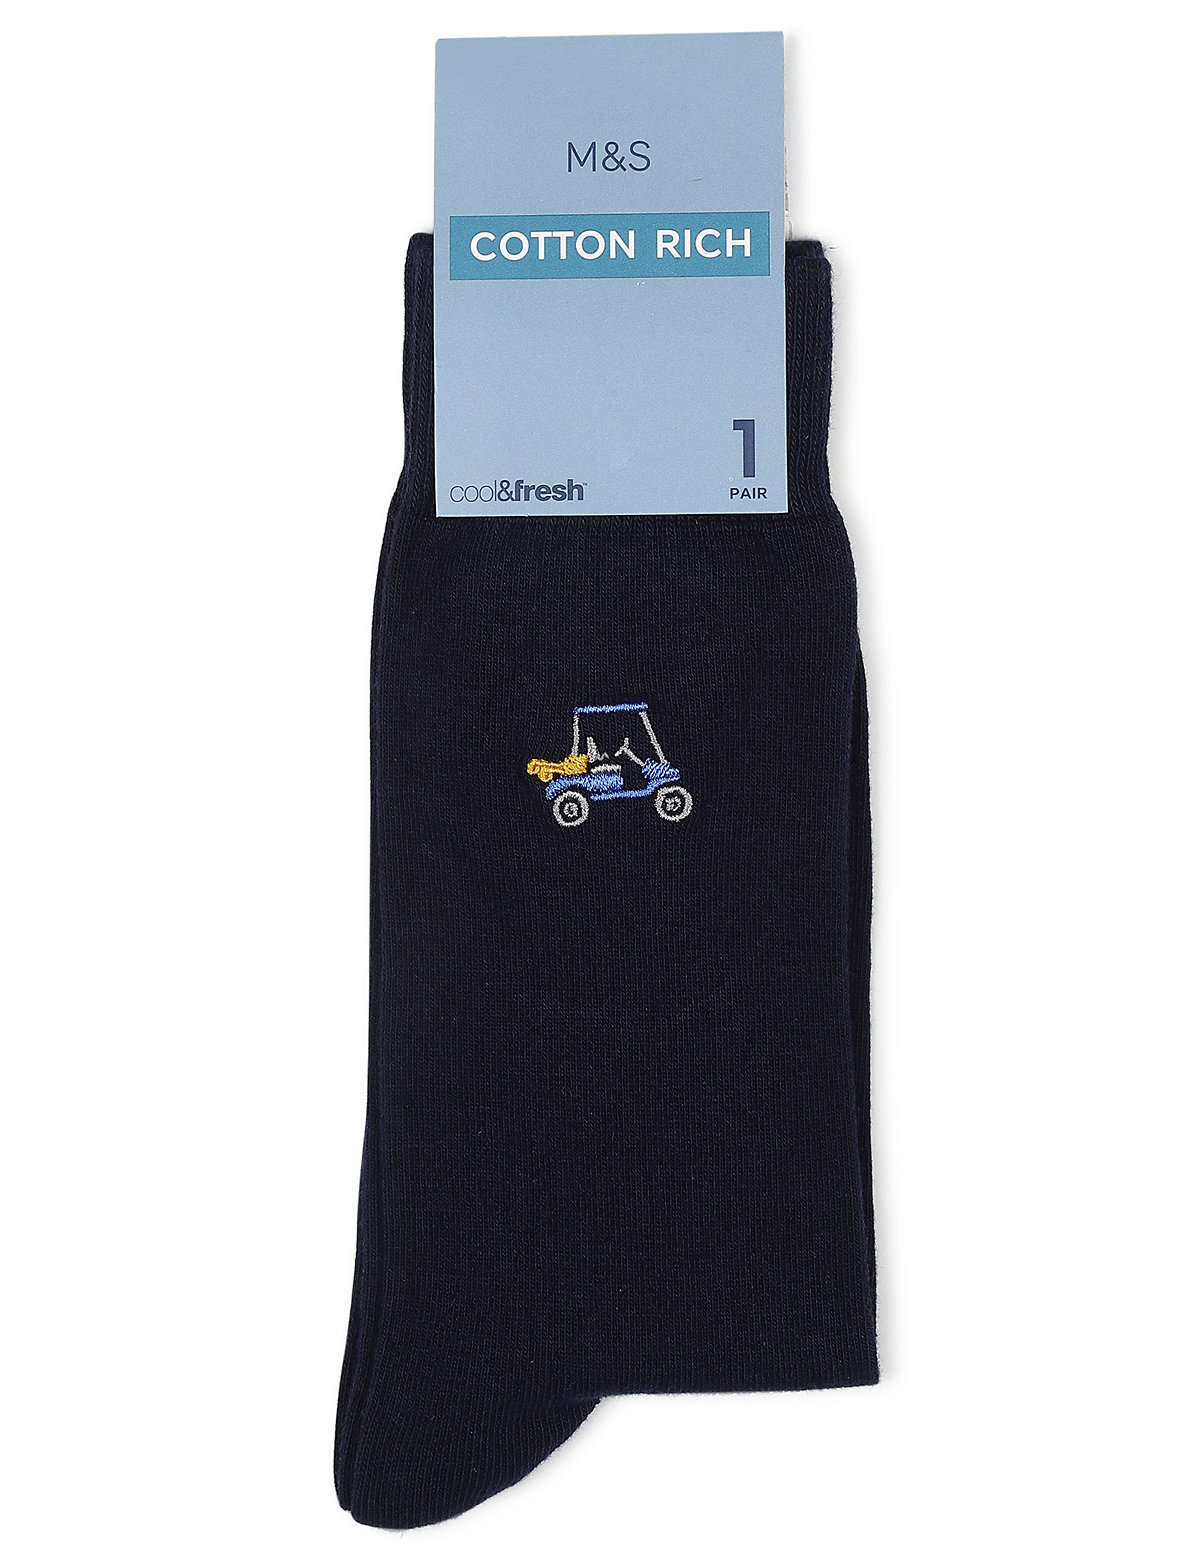 Pair of Cotton Mix Embroidered Socks